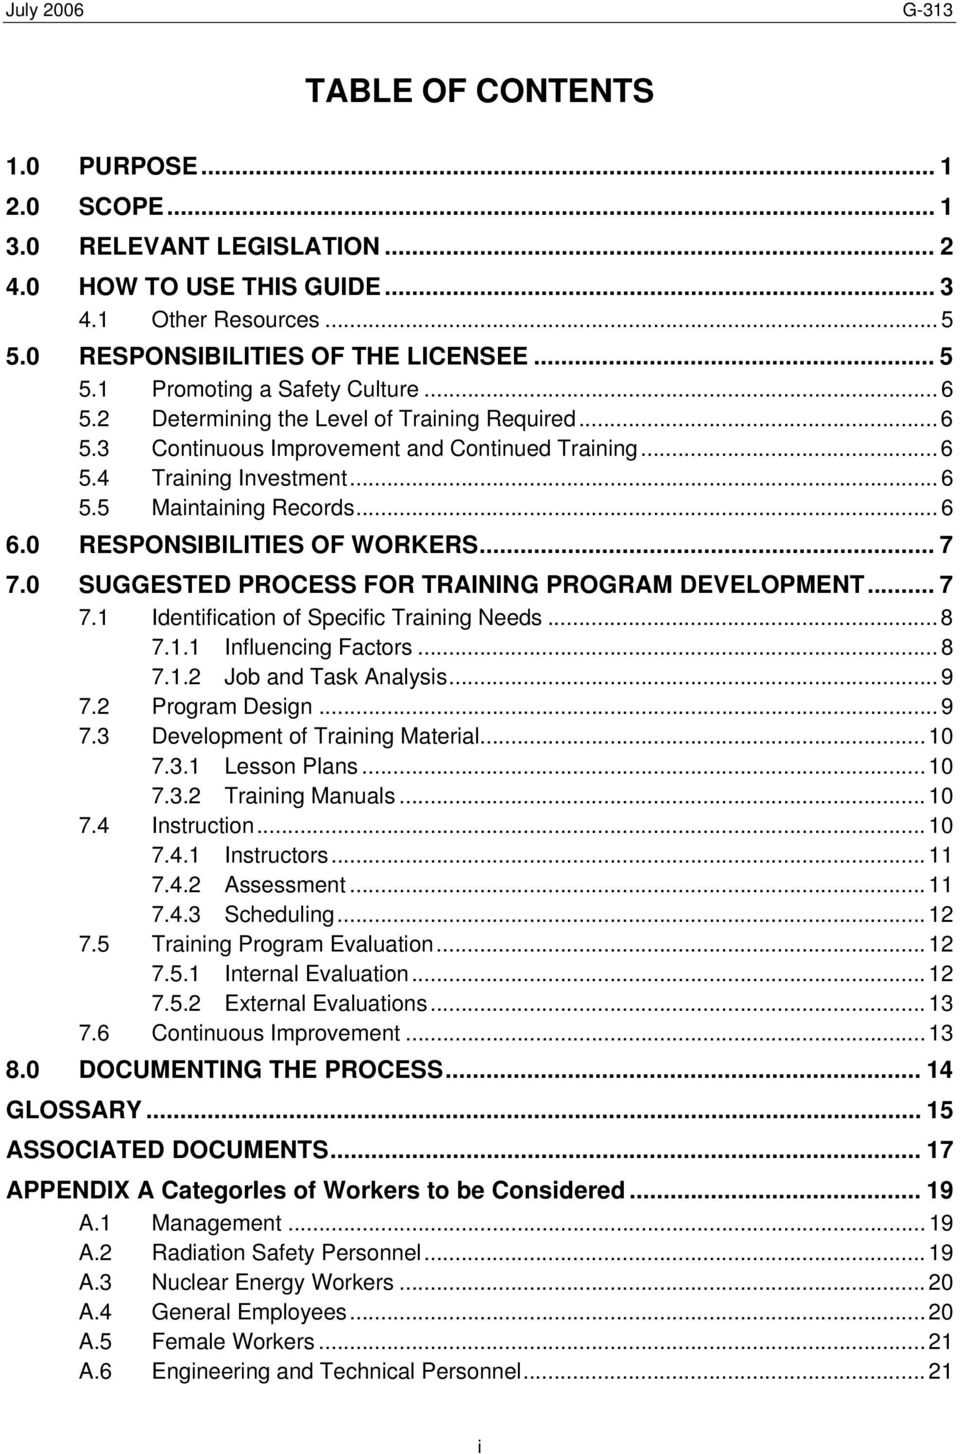 0 RESPONSIBILITIES OF WORKERS... 7 7.0 SUGGESTED PROCESS FOR TRAINING PROGRAM DEVELOPMENT... 7 7.1 Identification of Specific Training Needs... 8 7.1.1 Influencing Factors... 8 7.1.2 Job and Task Analysis.